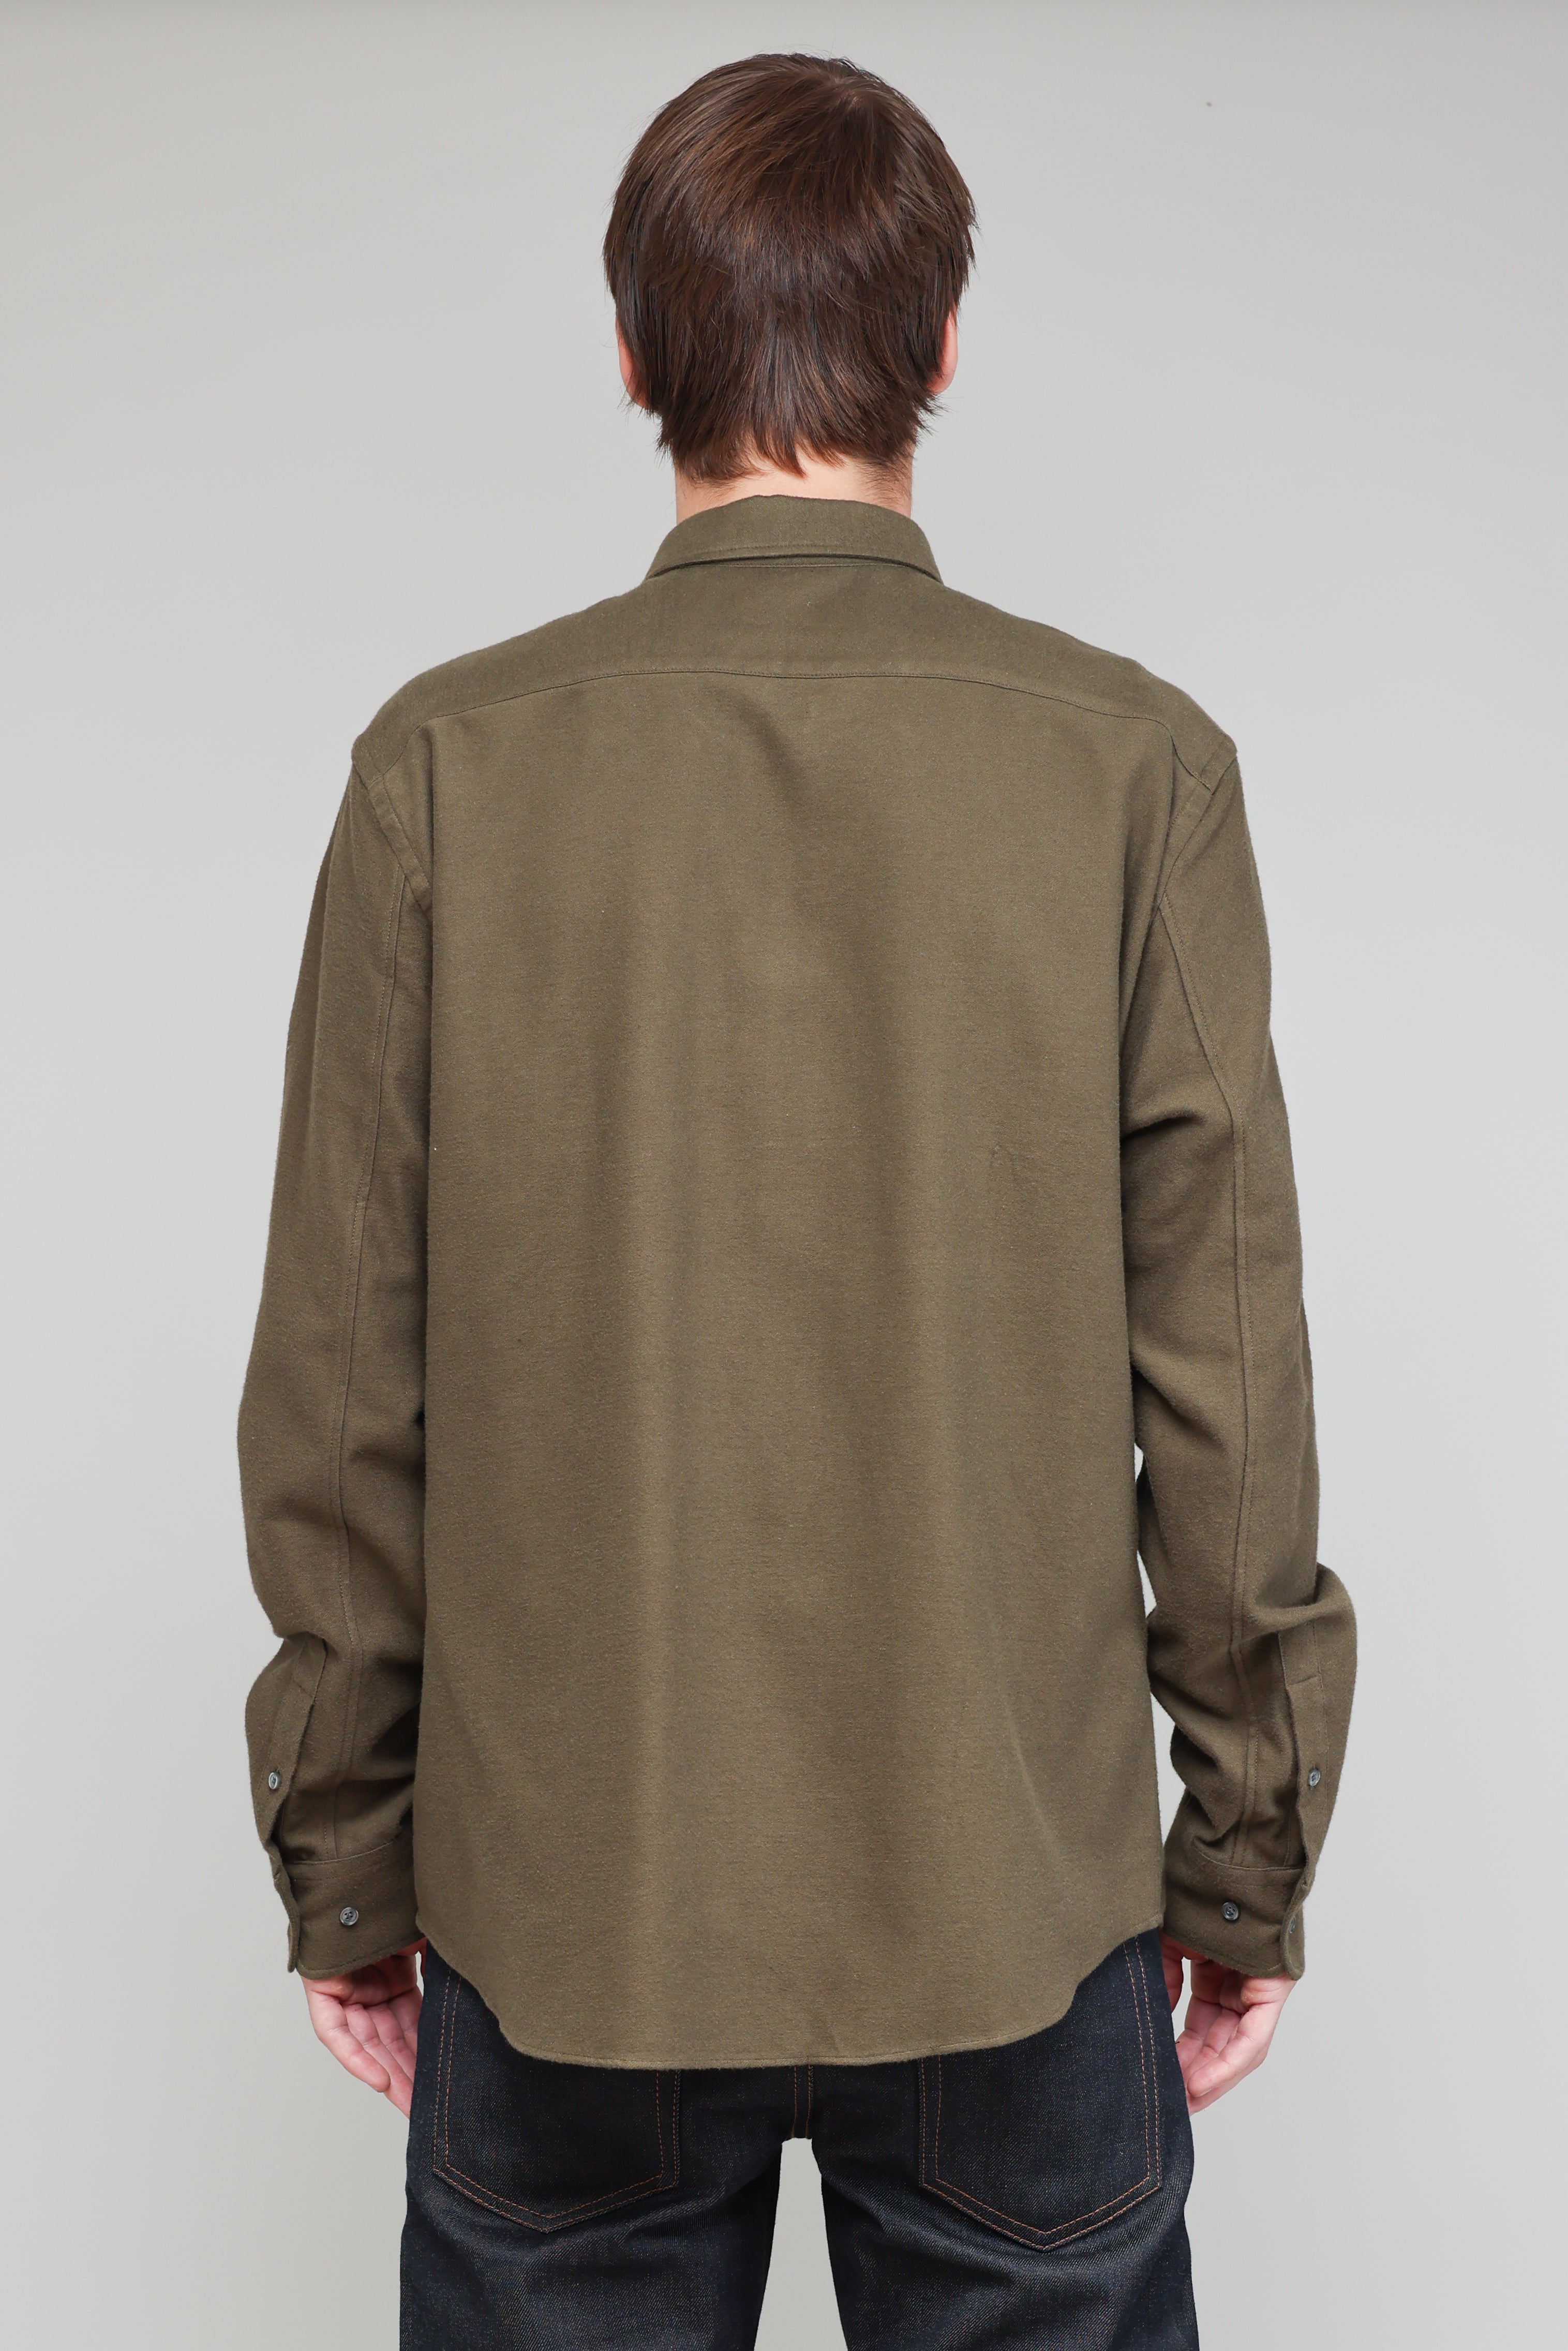 Japanese Flannel in Army Green 03